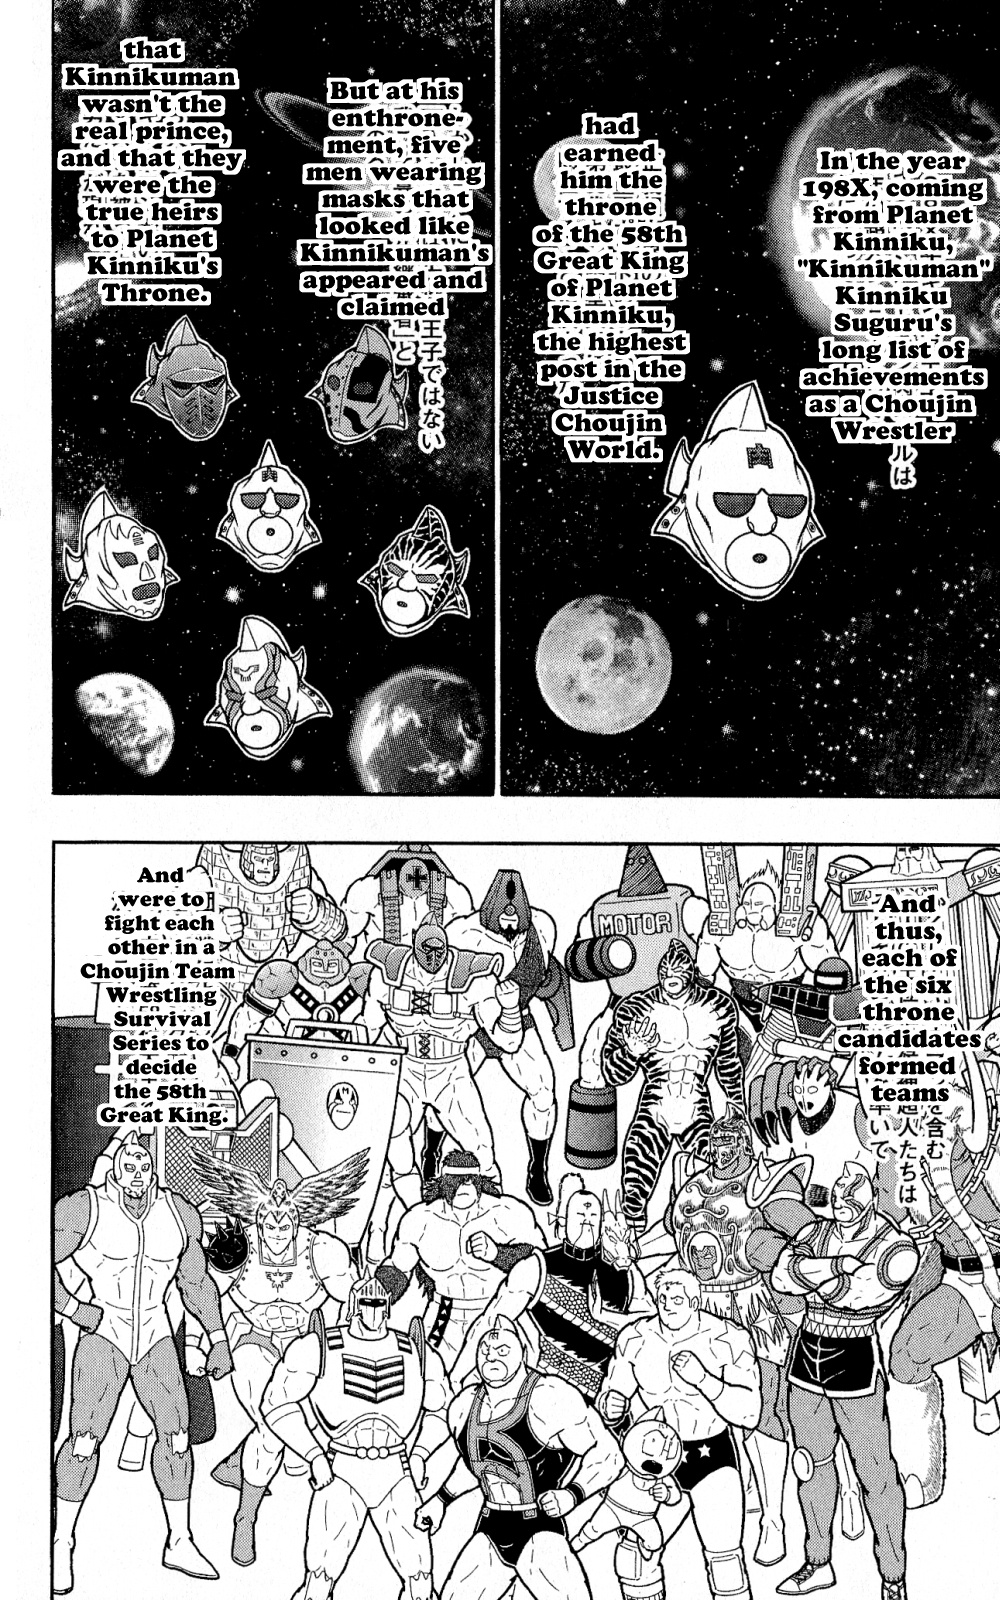 Kinnikuman One Shot Collection (2011-2014) Vol.1 Chapter 4: Secret Story - The Choujin Blood Oath Brigade's Formation! - Picture 3